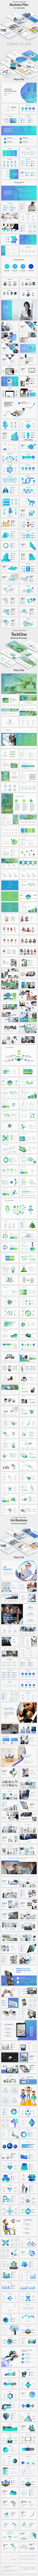 Business Plan - 3 in 1 Bundle Powerpoint Template